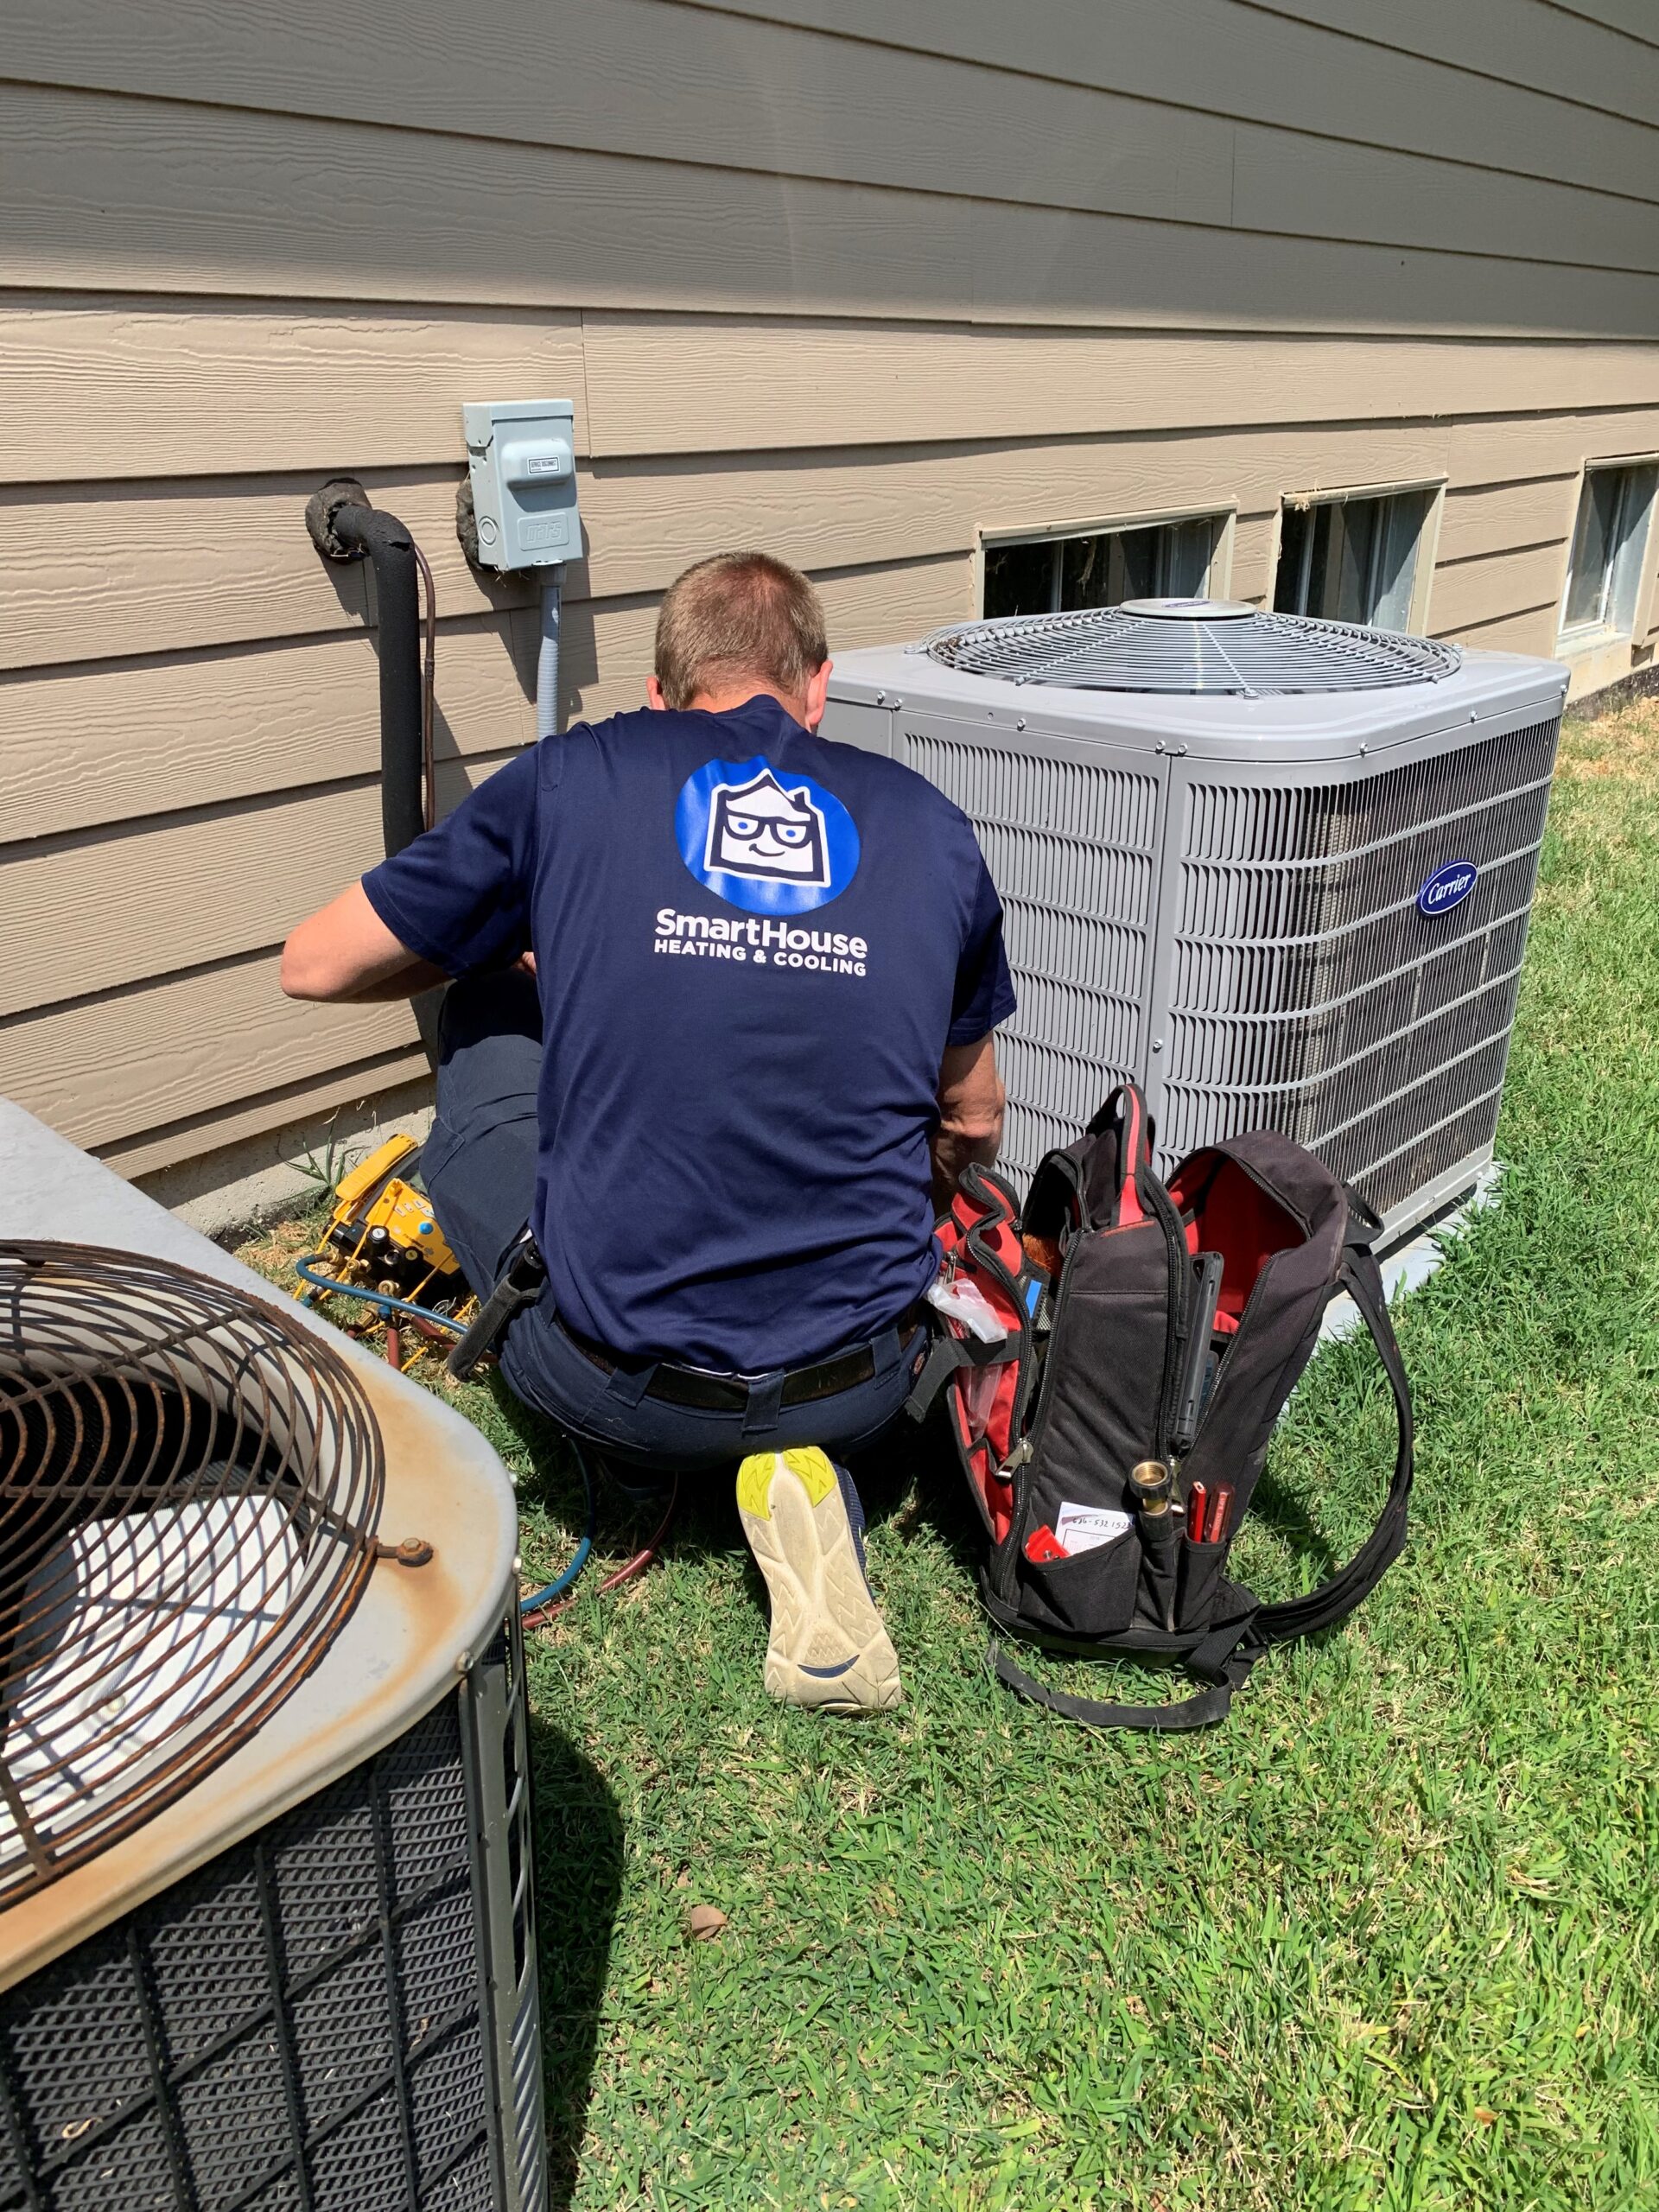 smarthouse tech cleaning ac unit outside